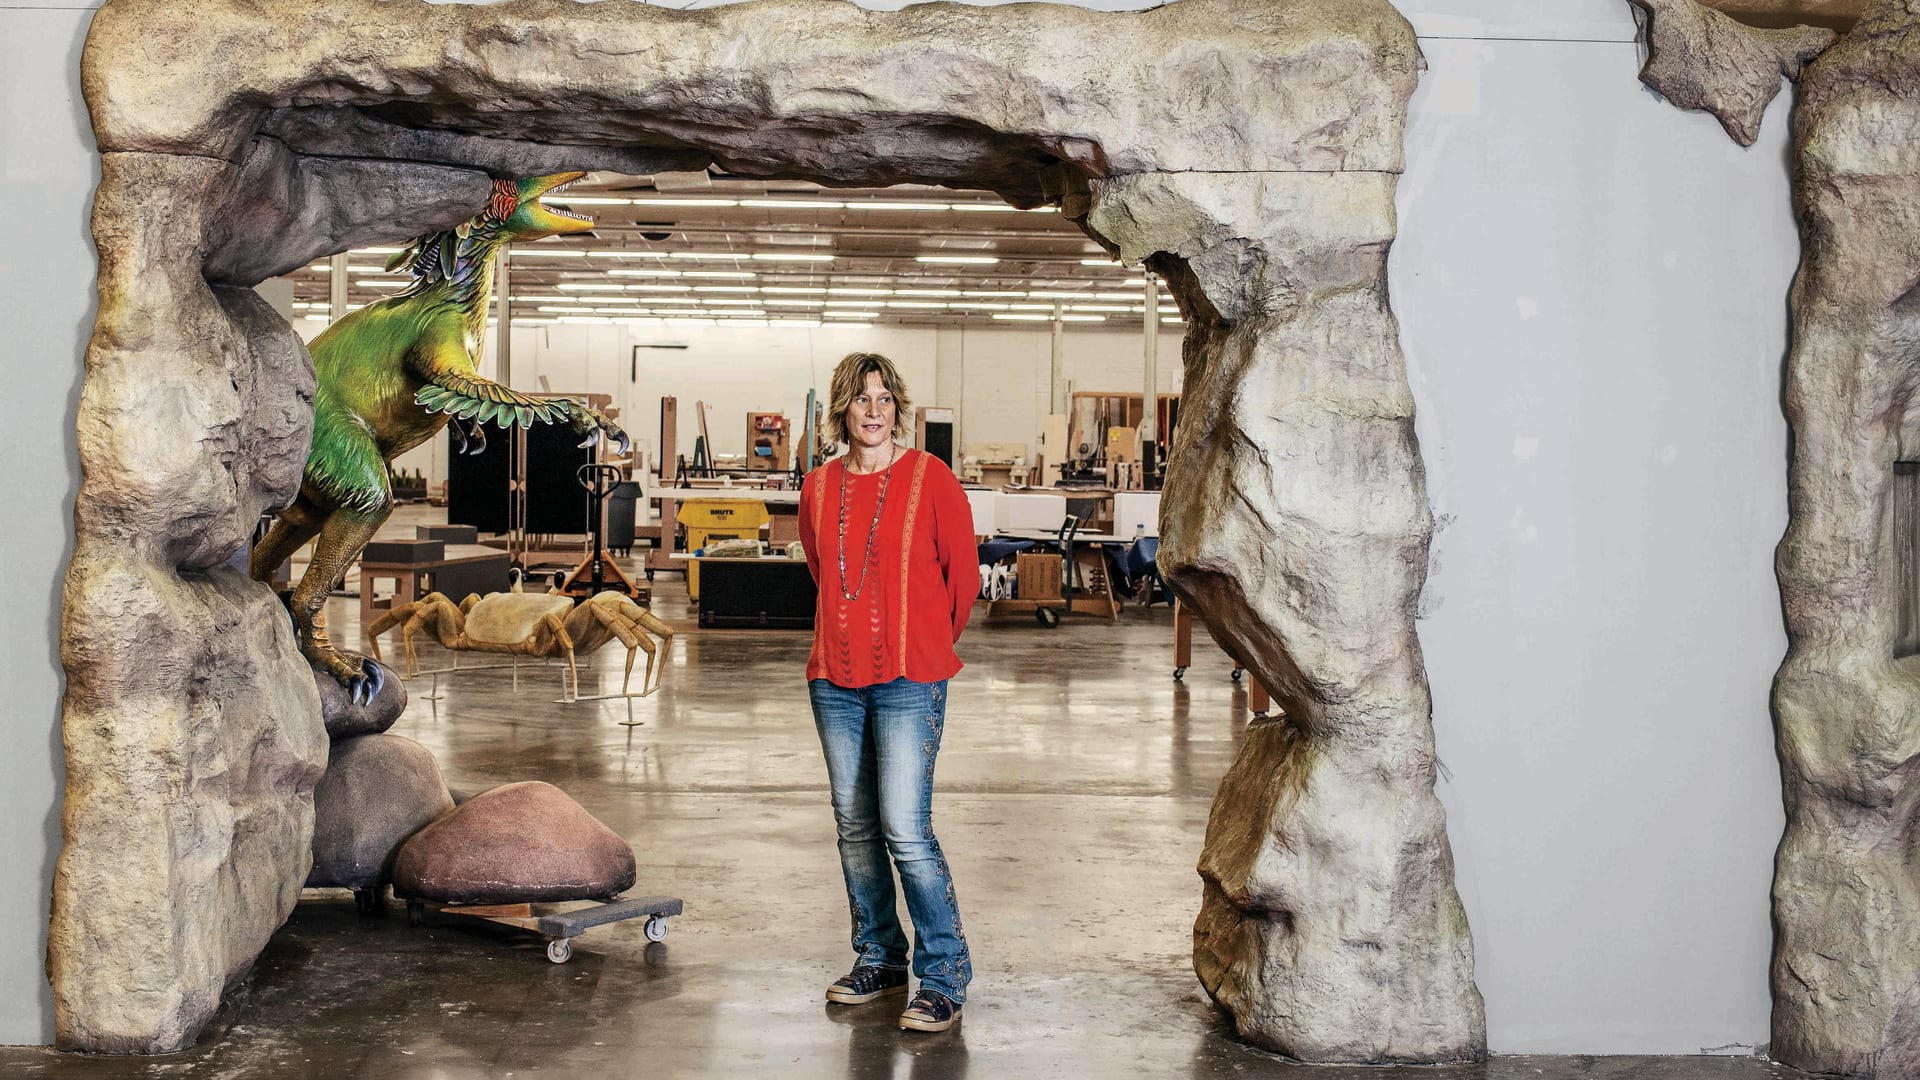 Her Business Builds 3-D Experiences for the World's Museums